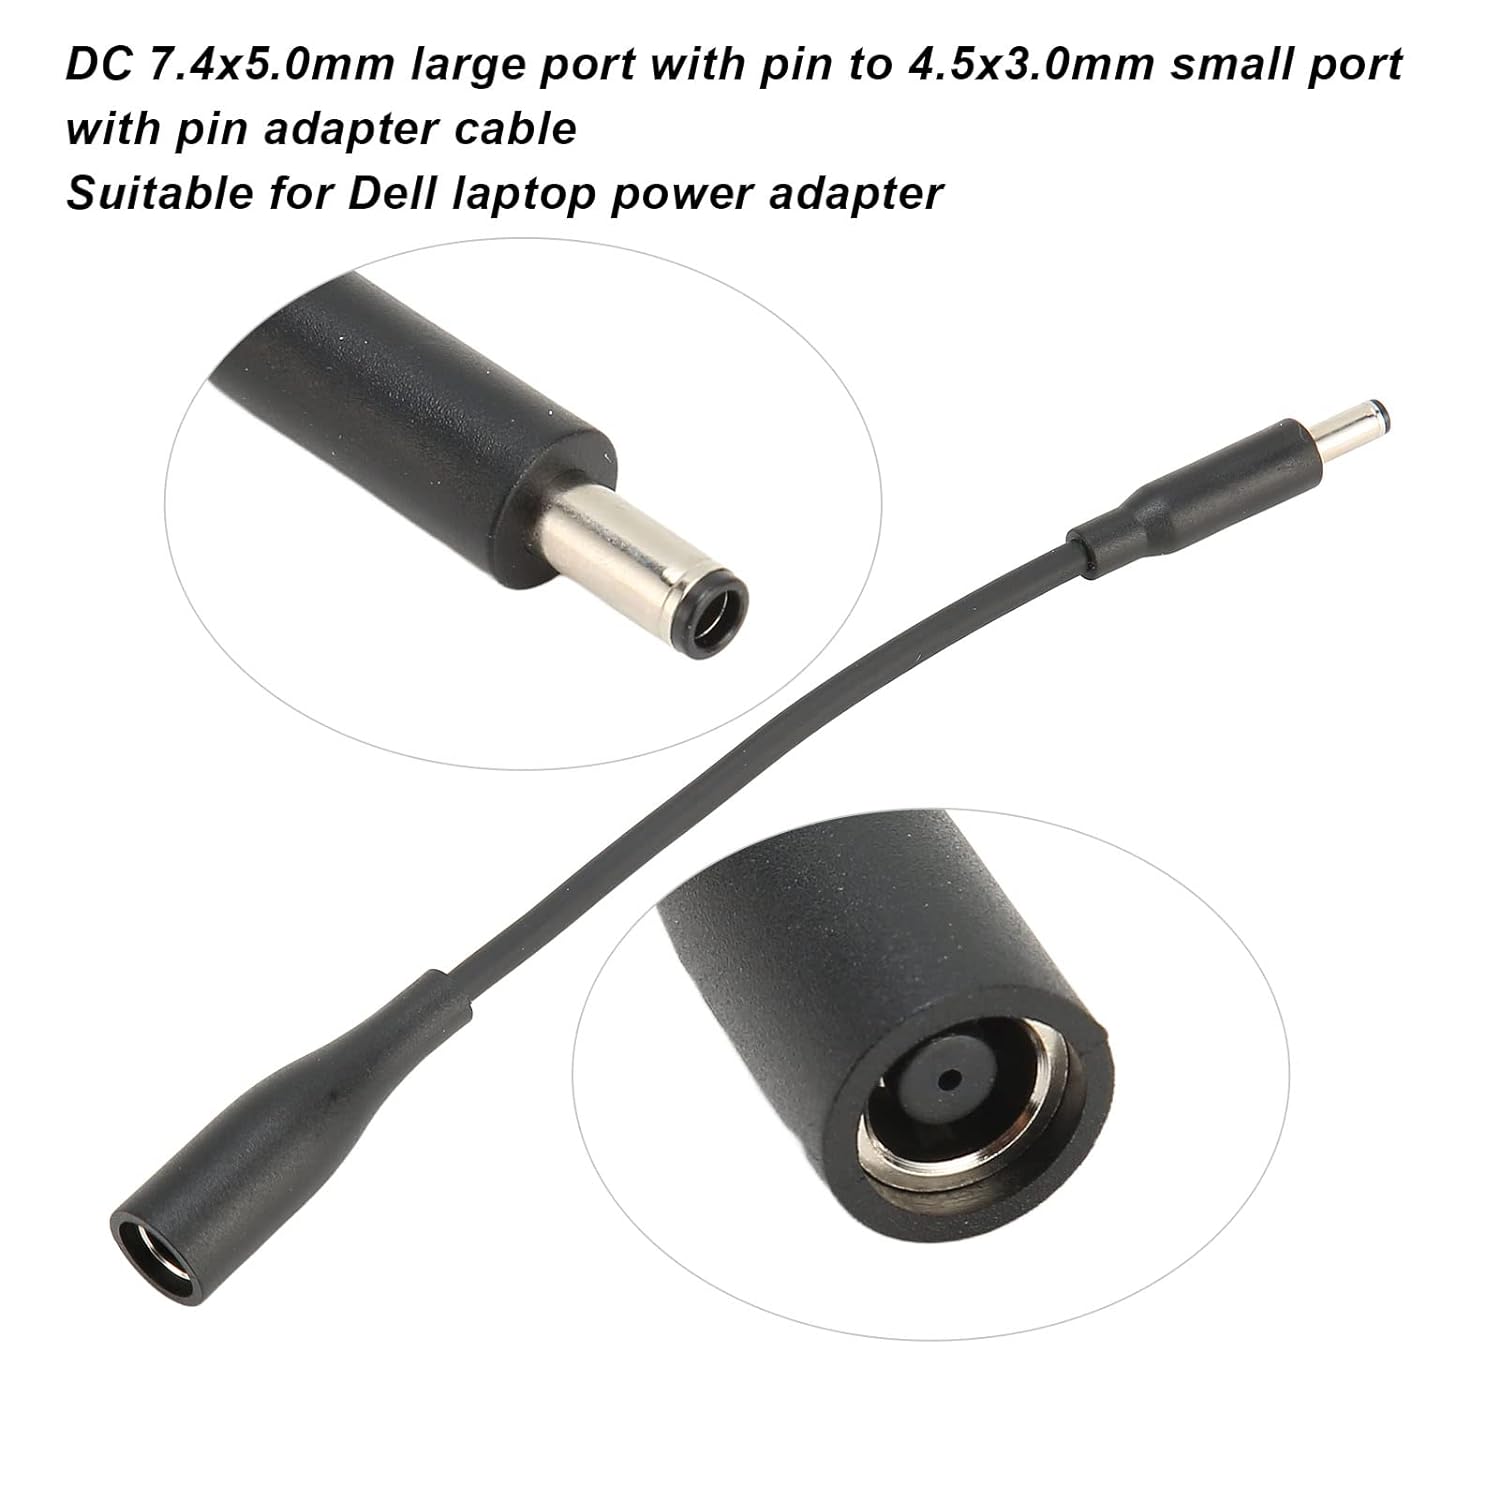 HF-D7450M4535F-A: Tip Adapter Converter Cable DC 7.4x5.0mm Male to 4.5x3.0mm Female for Dell Laptop Power Supply, Plug and Play - Click Image to Close